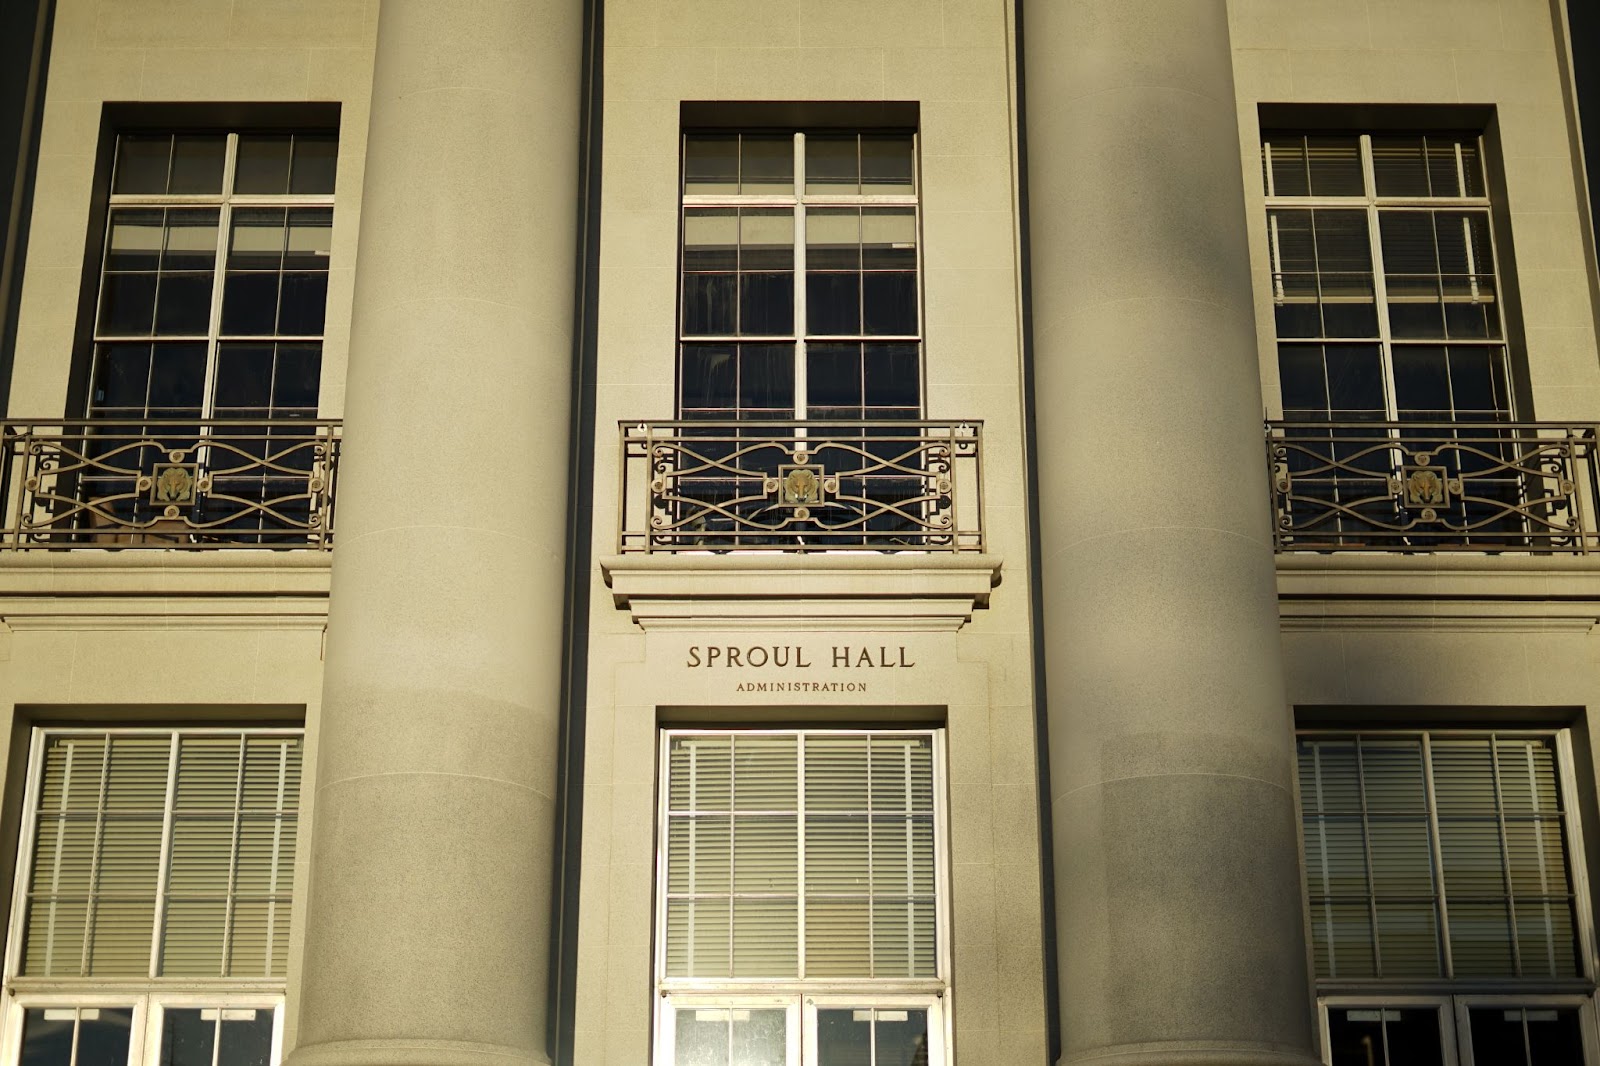 Three balconies above Sproul Hall, all with ornate railings, all of which have a bear motif in the center. 